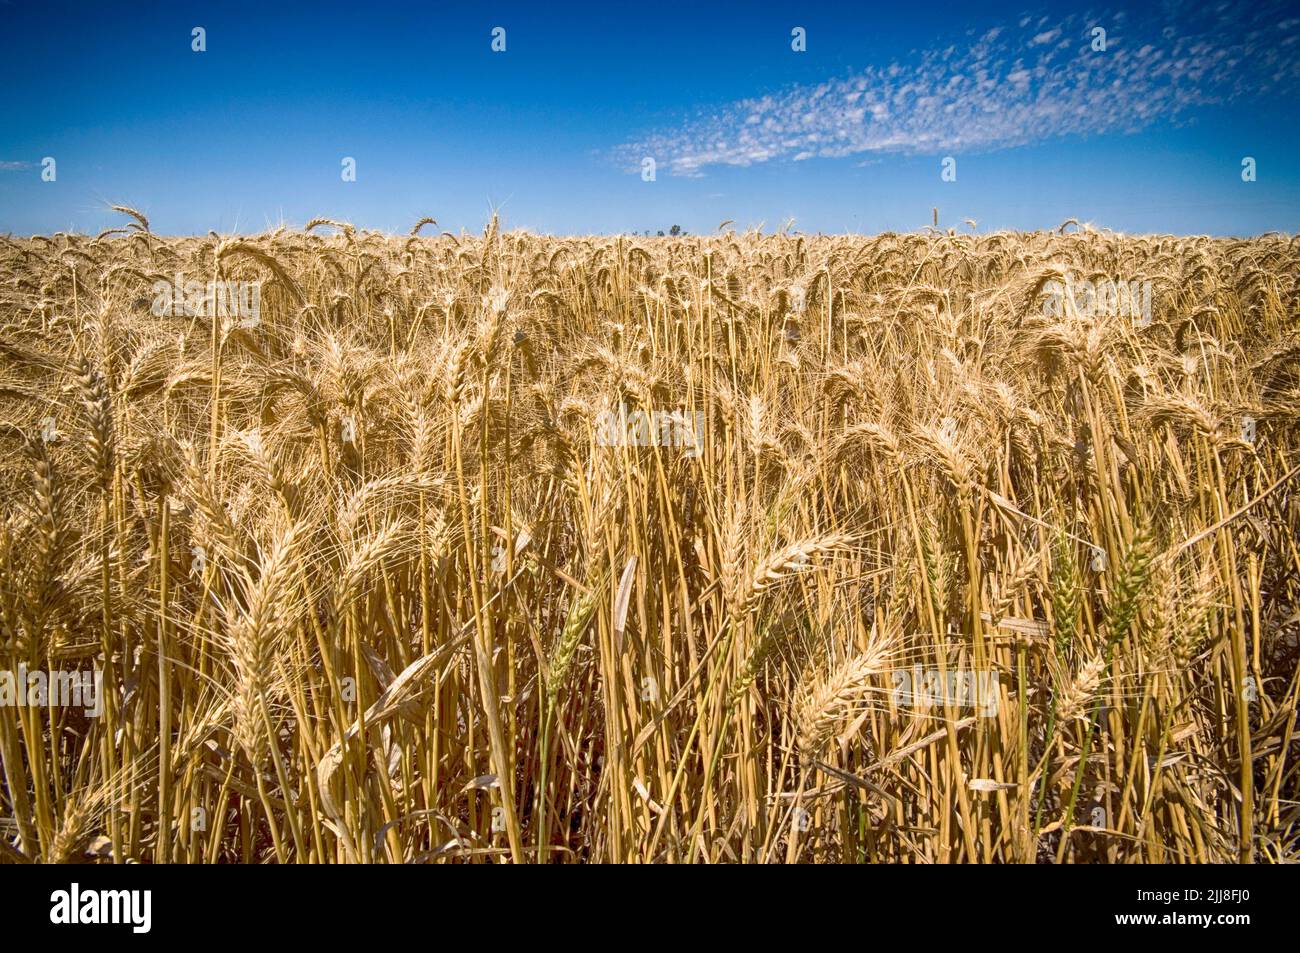 Ripening wheat, central New South Wales, Australia Stock Photo